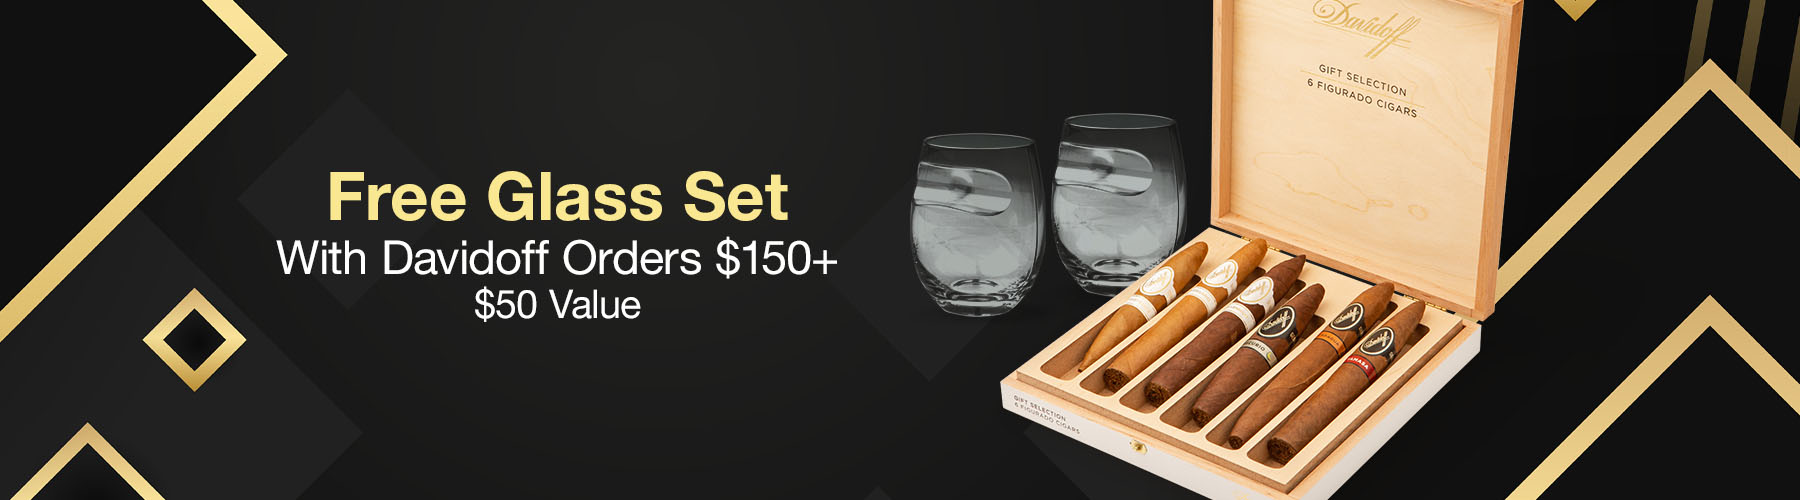 Free glass set with Davidoff orders $150+!
$50 Value